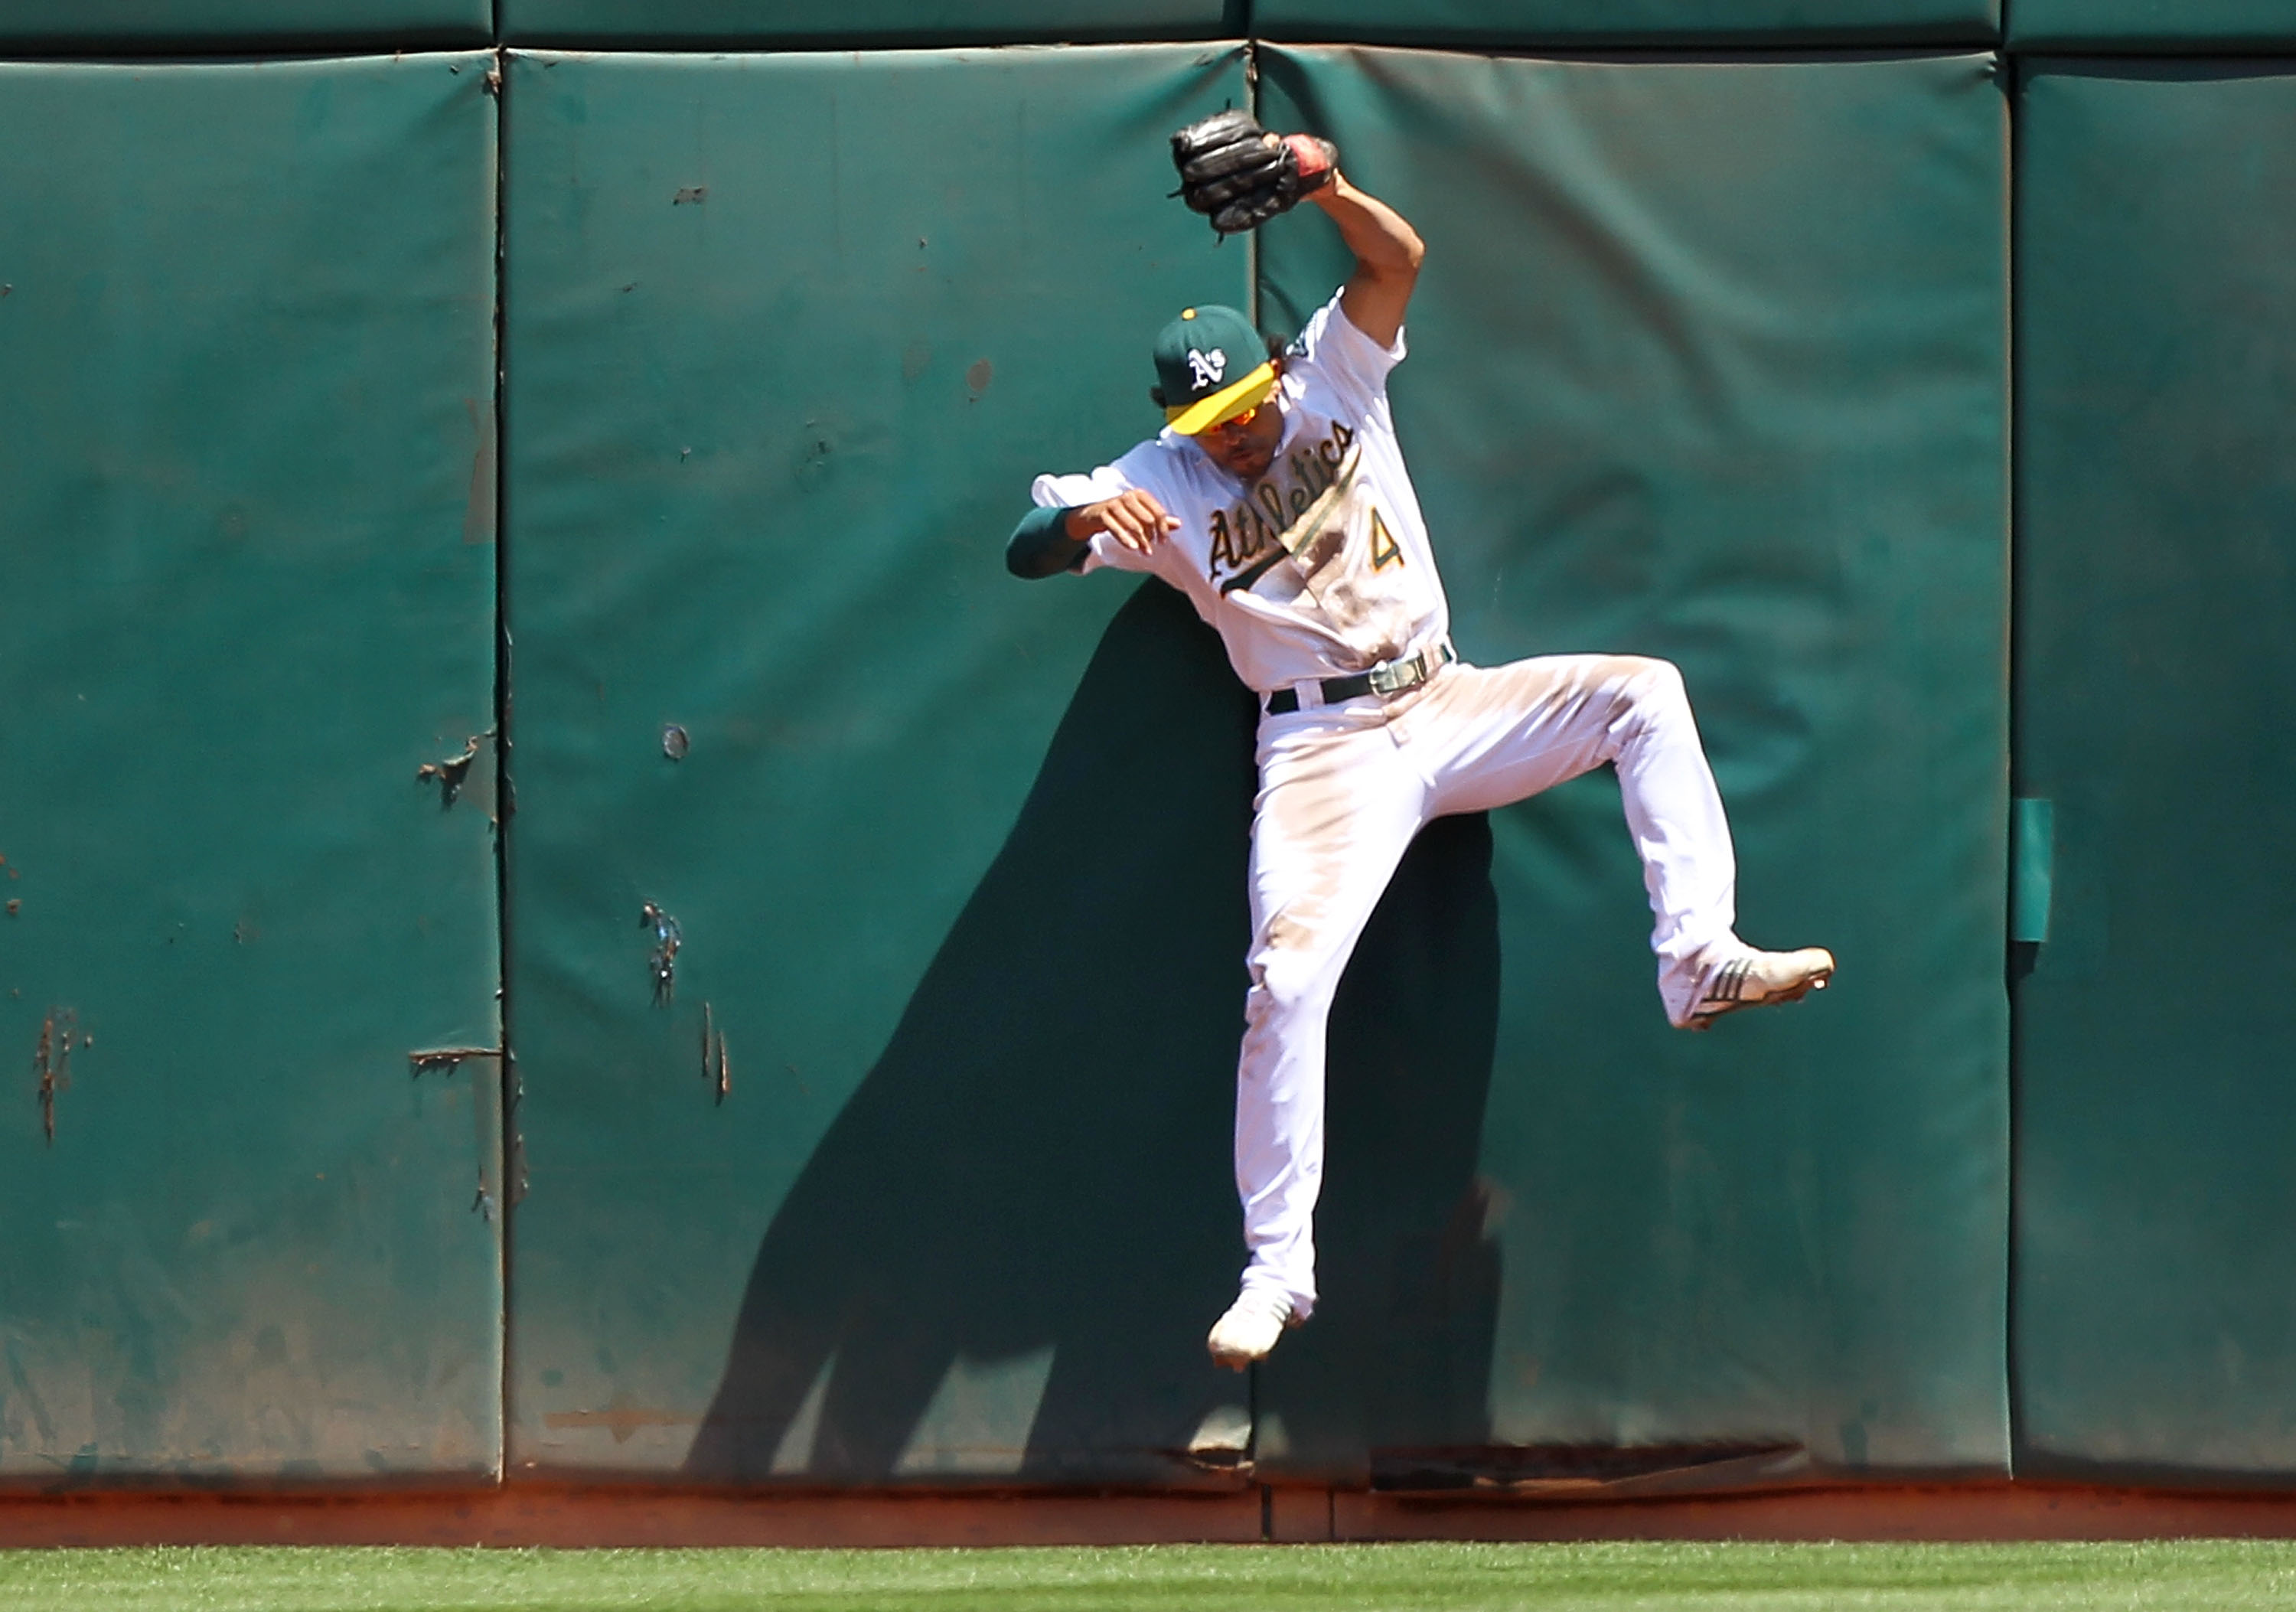 OAKLAND, CA - AUGUST 08:  Coco Crisp #4 of the Oakland Athletics catches a ball hit by Bengie Molina of the Texas Rangers during an MLB game at the Oakland-Alameda County Coliseum on August 8, 2010 in Oakland, California.  (Photo by Jed Jacobsohn/Getty Im